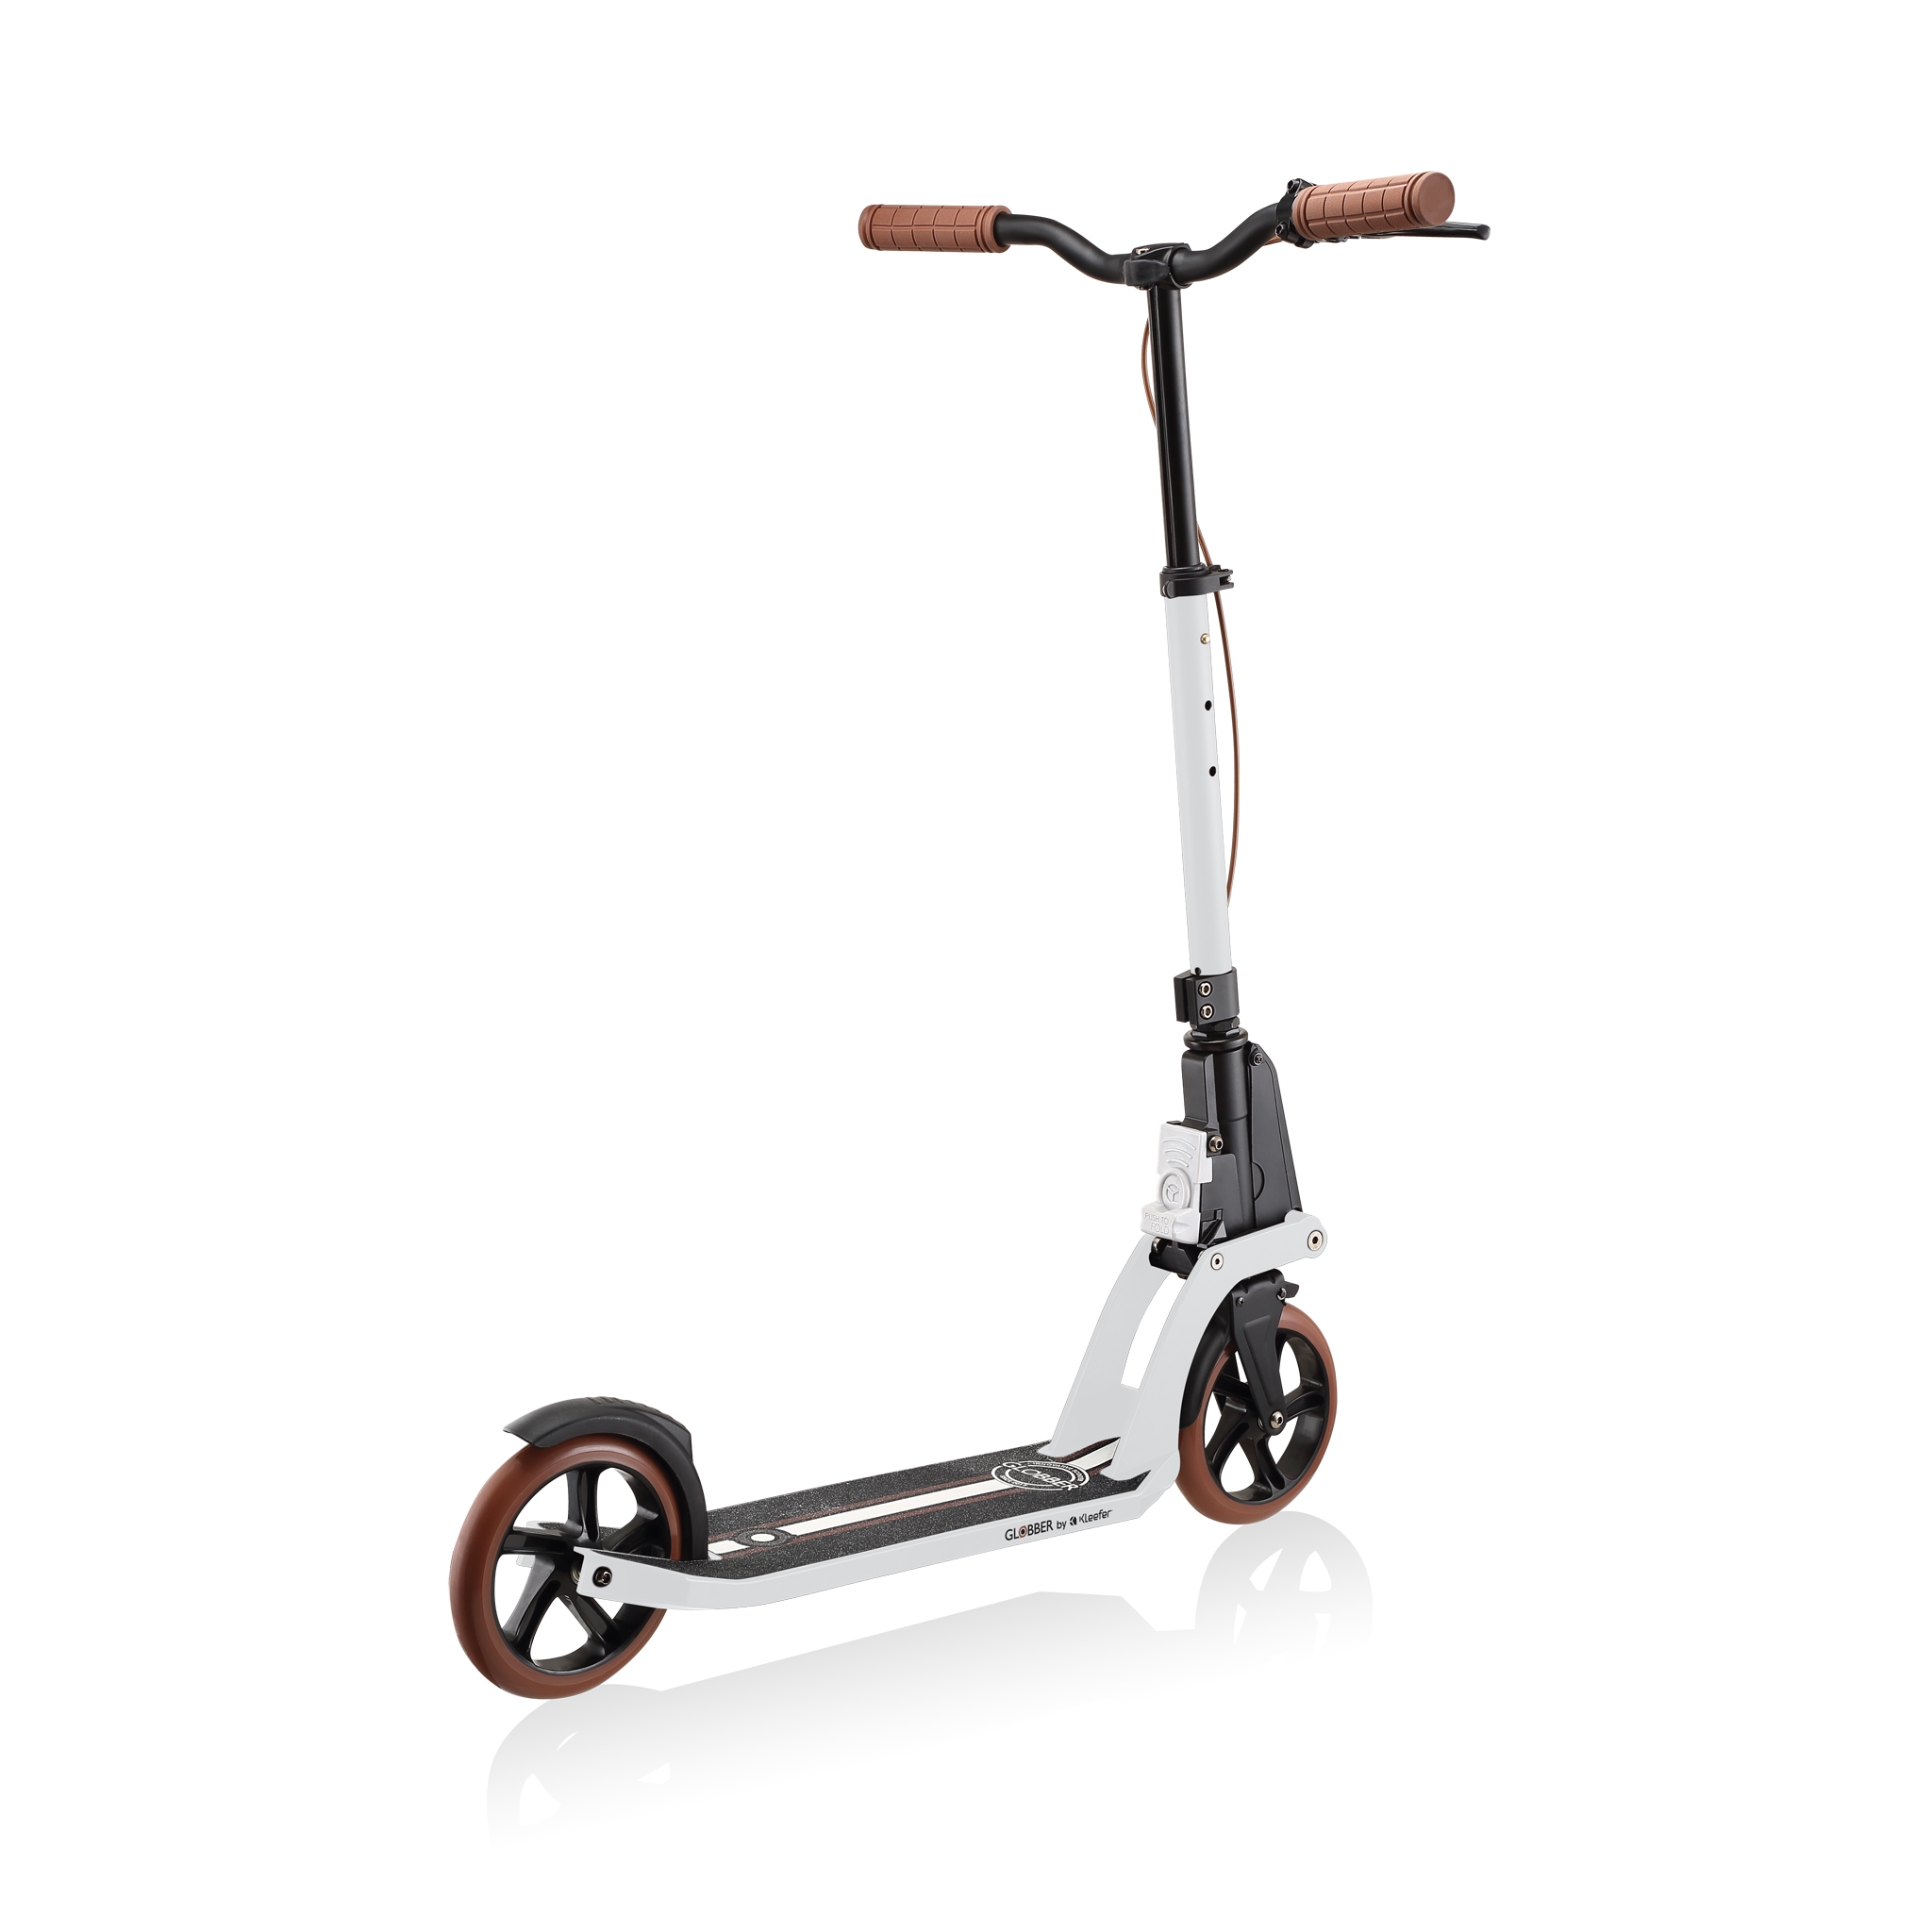 ONE-K-180-PISTON-DELUXE-extra-safe-foldable-kick-scooter-for-adults-with-2-brakes 4